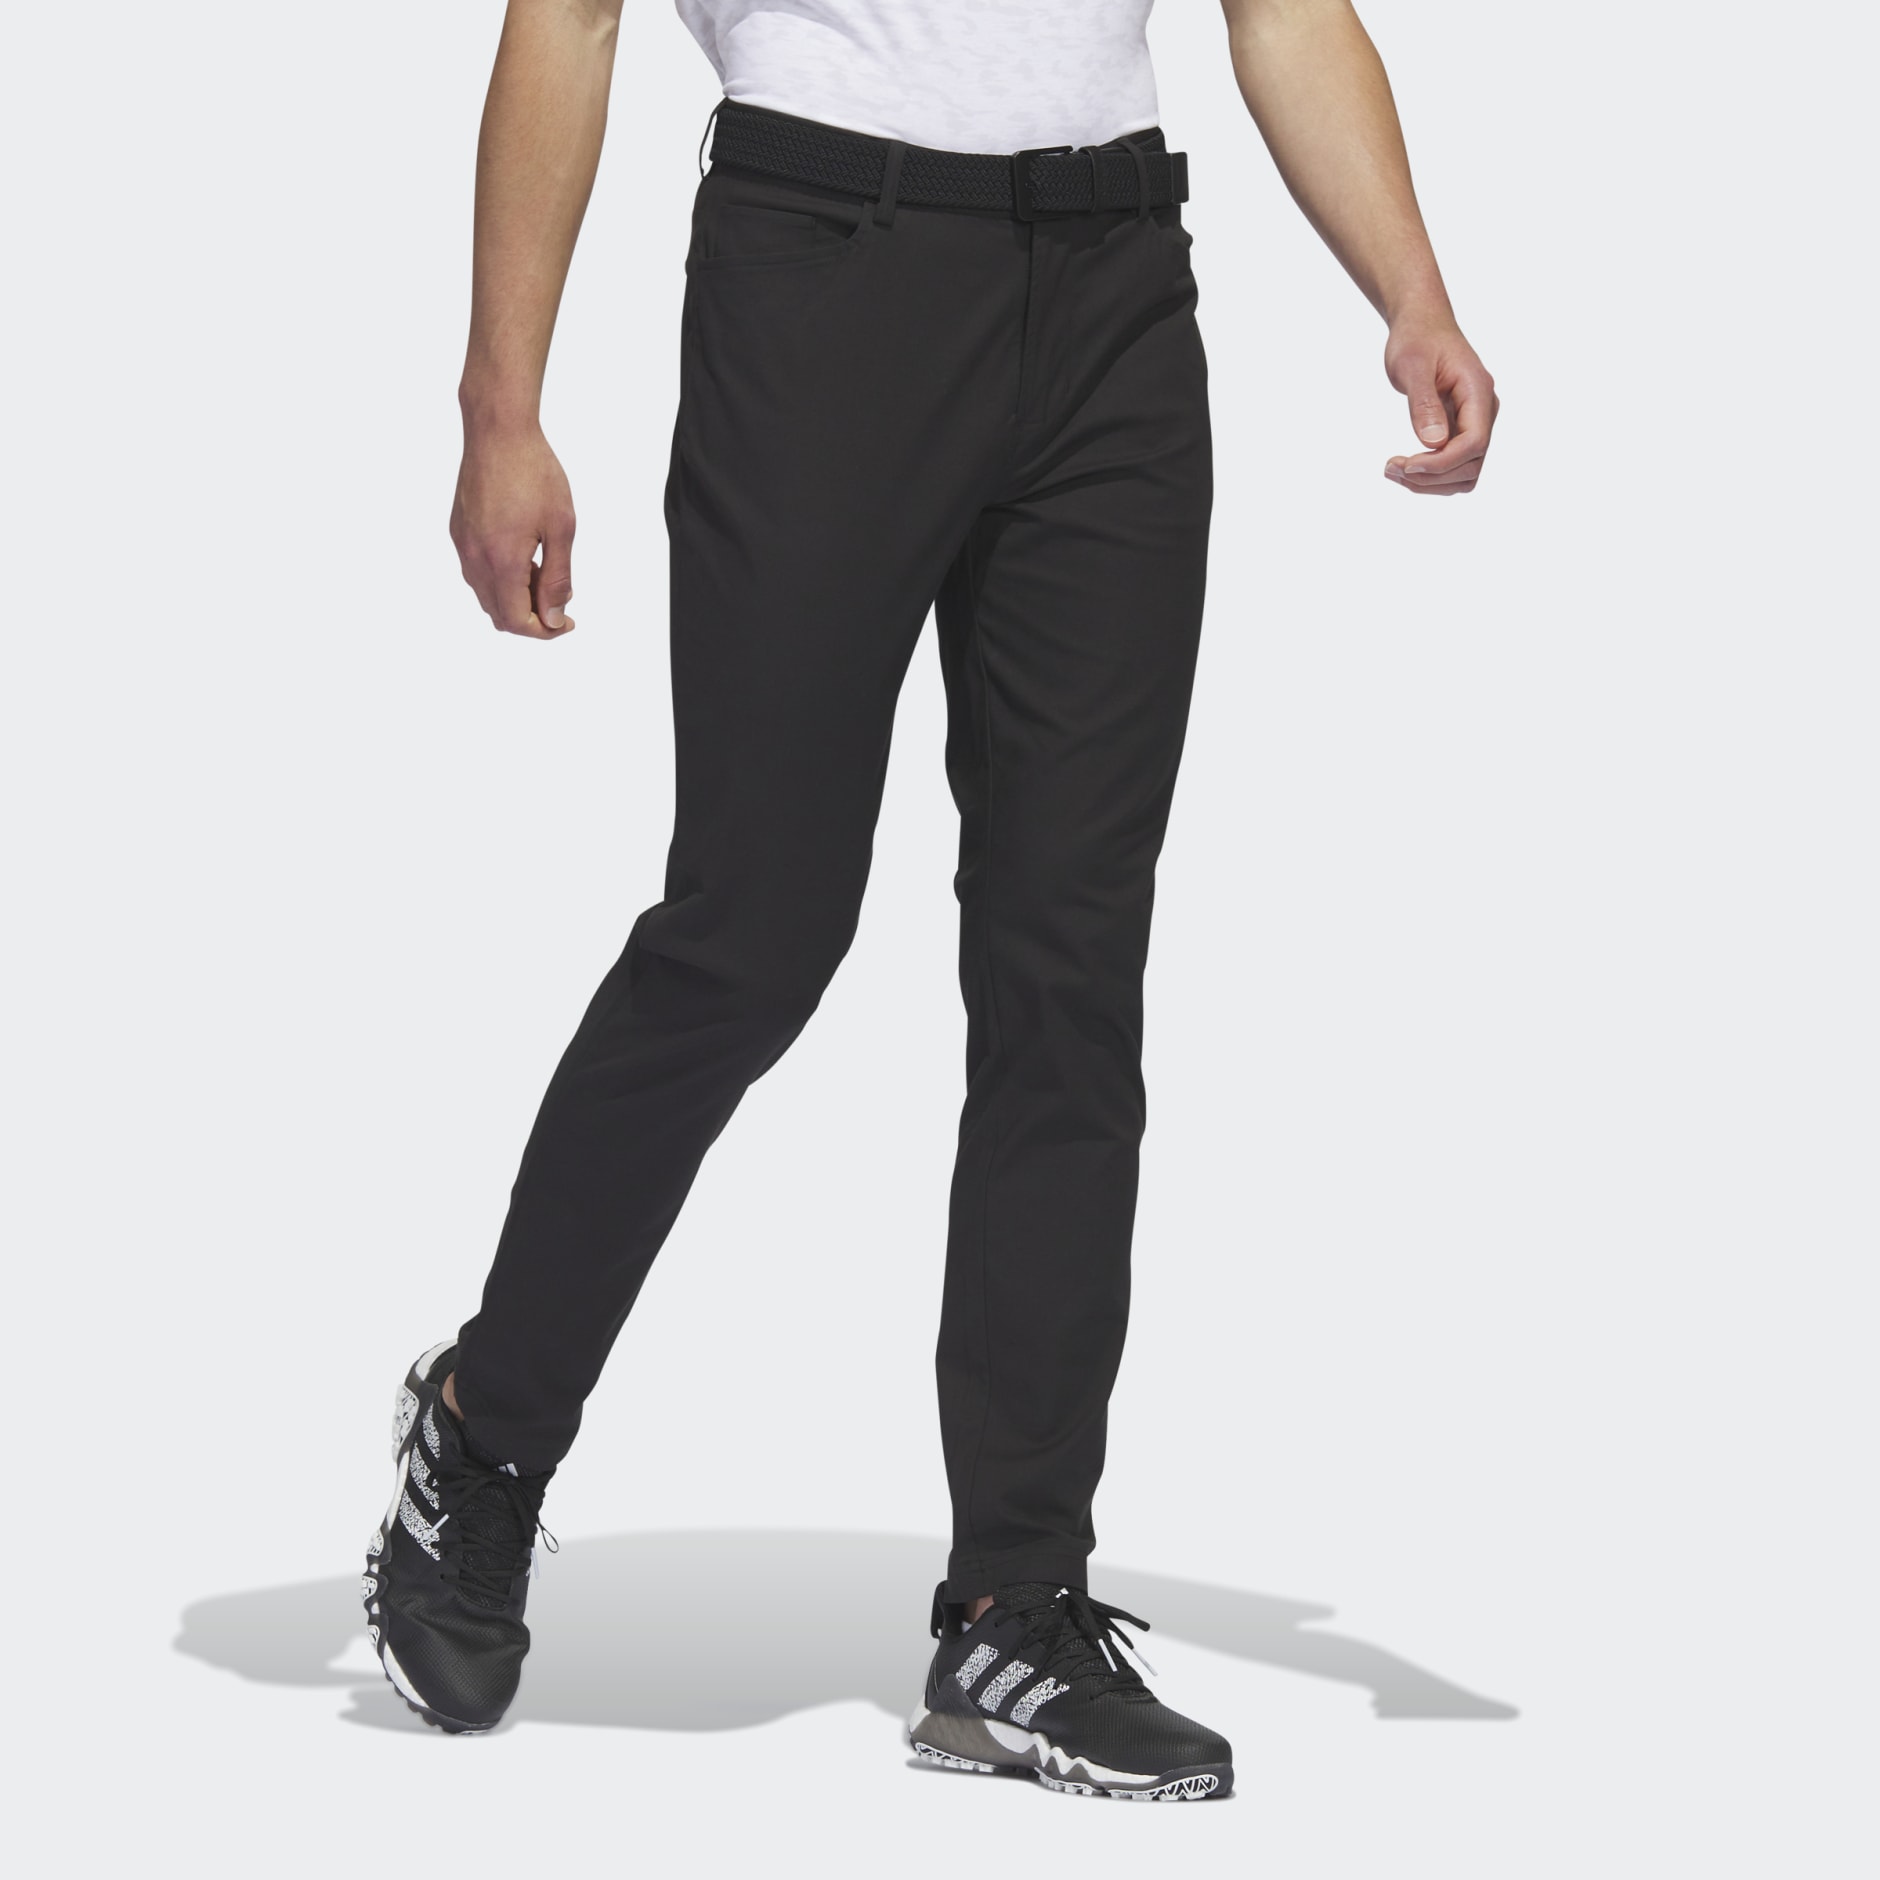 Clothing - Go-To 5-Pocket Golf Pants - Black | adidas South Africa